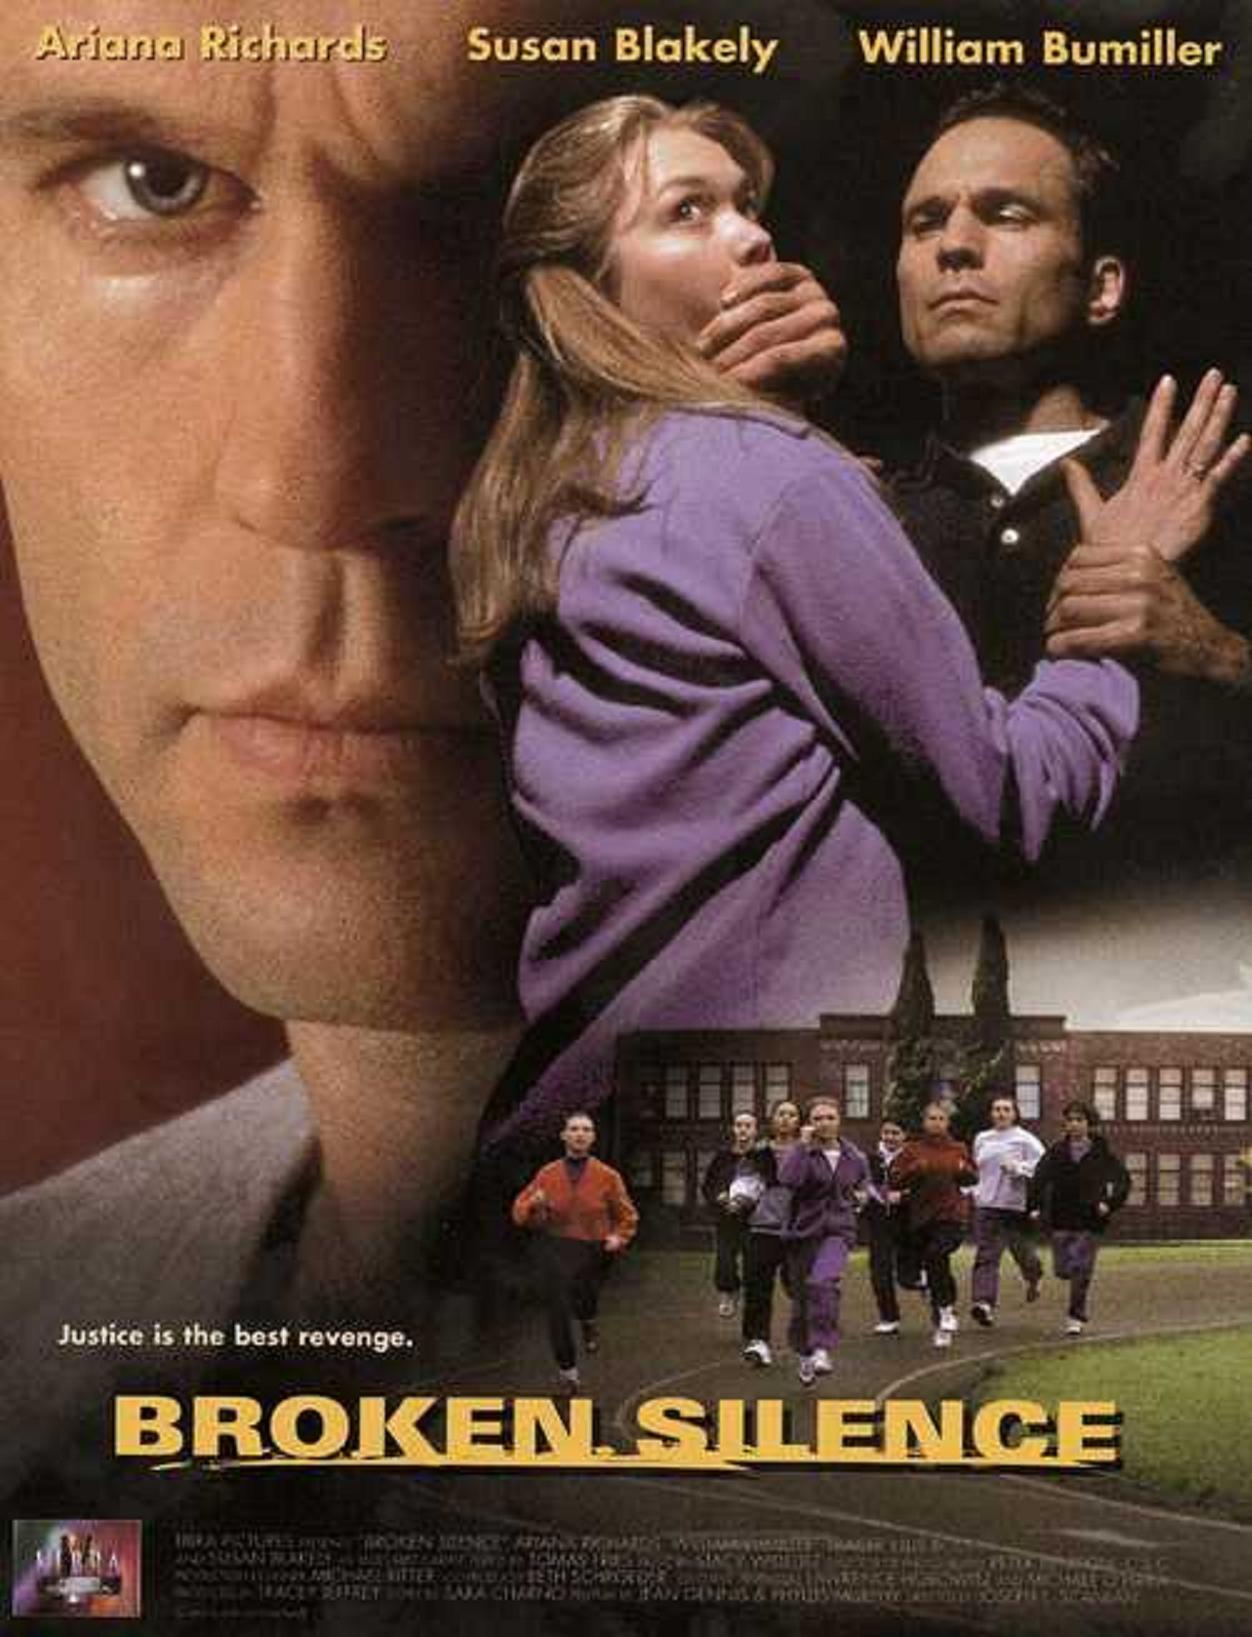 Broken Silence: A Moment of Truth Movie (1998) starring Ariana Richards on DVD on DVD